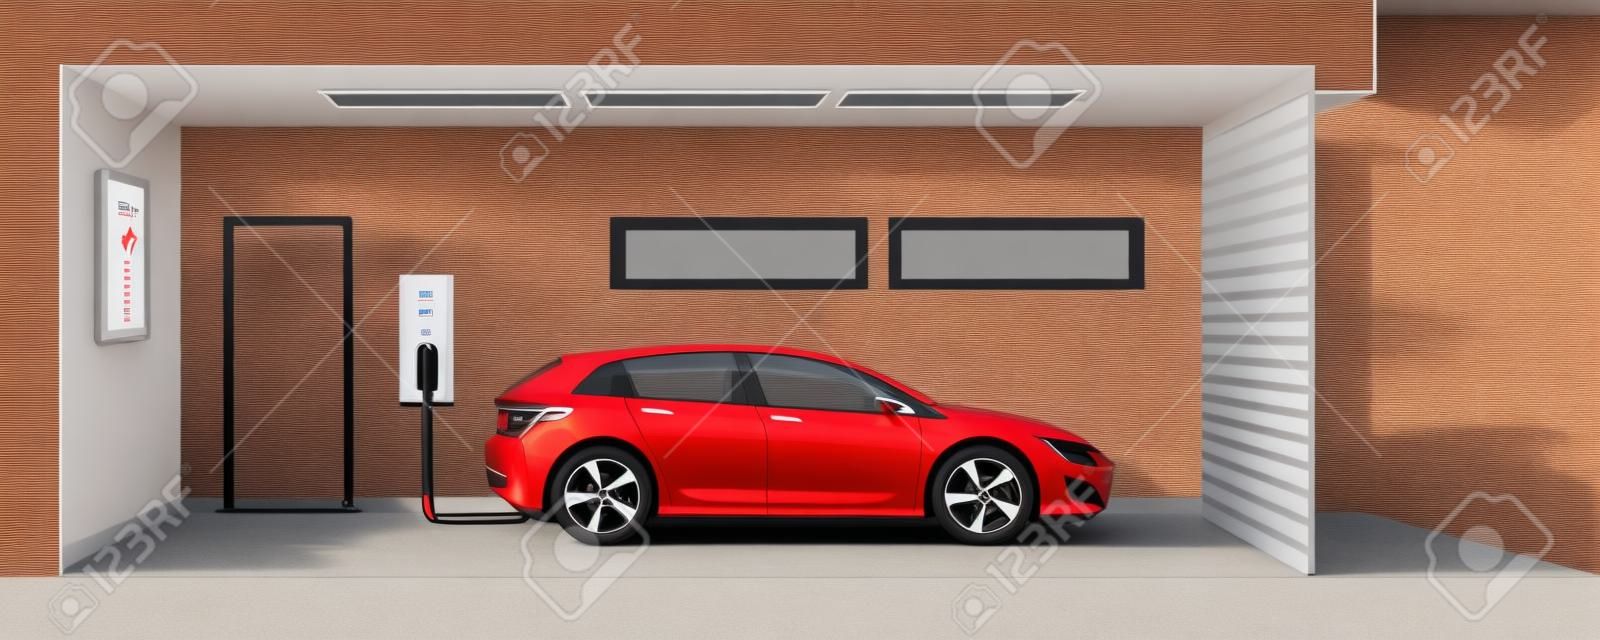 Flat illustration of a red electric car charging at the charger station point inside home garage. Integrated smart domestic electromobility e-motion concept.